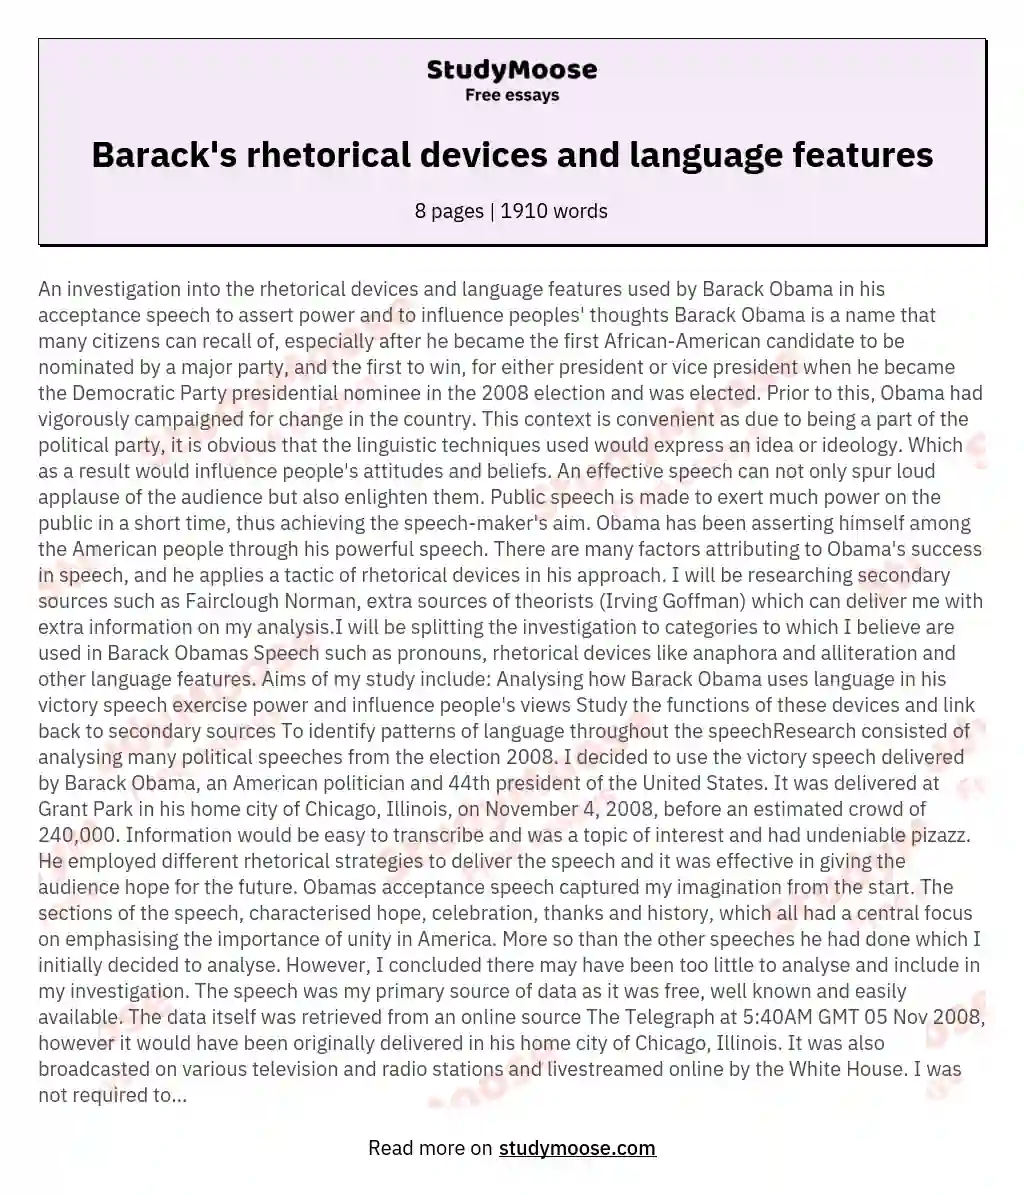 Barack's rhetorical devices and language features essay